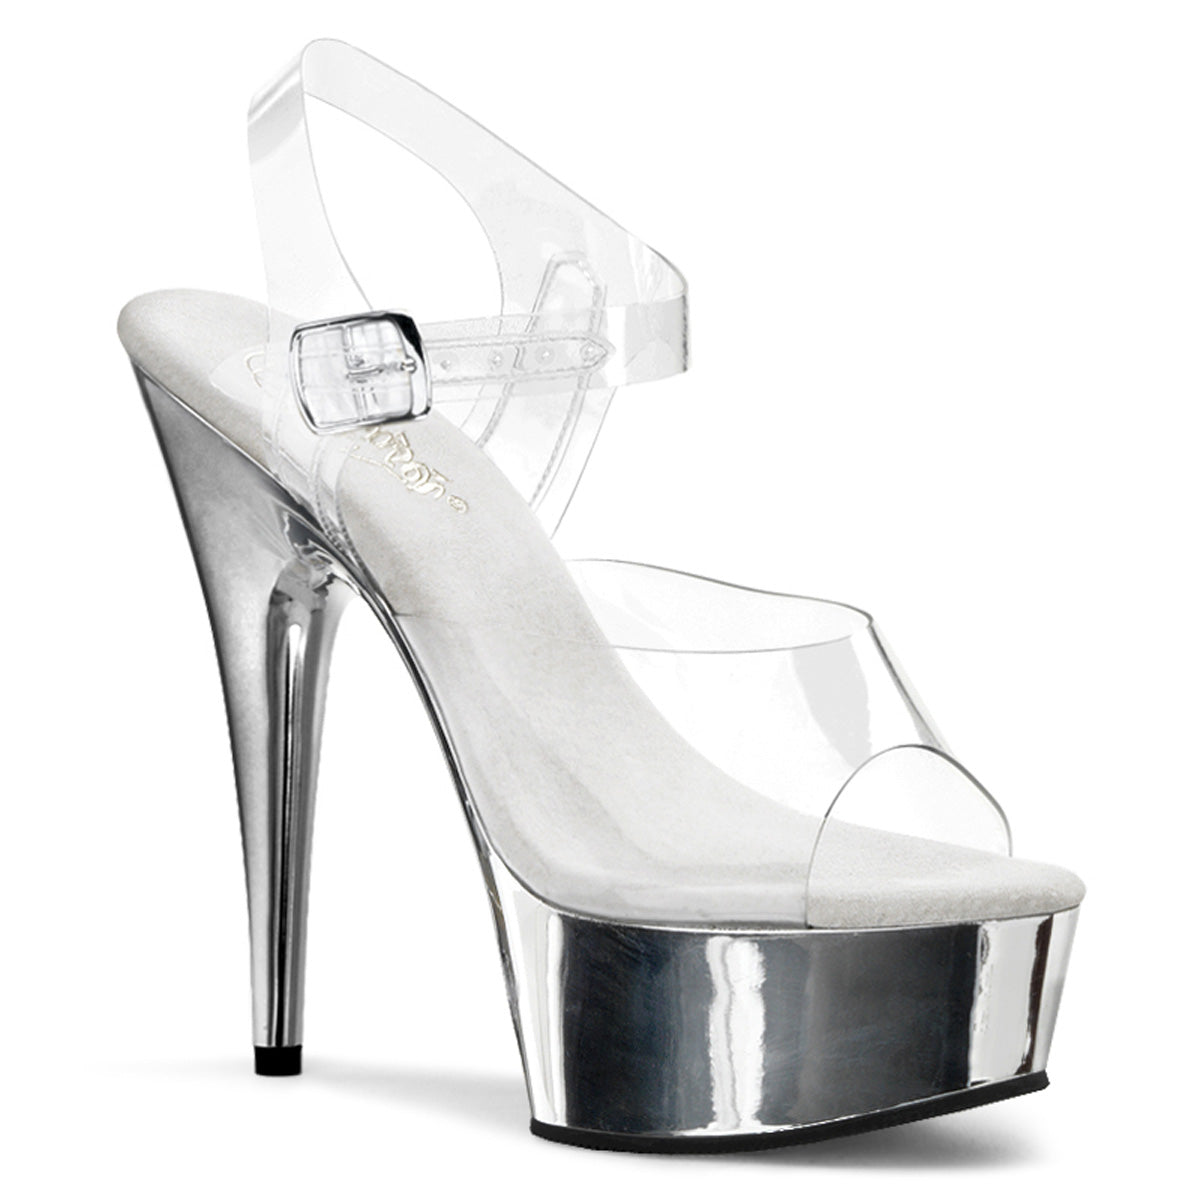 PLEASER DELIGHT-608 SILVER CHROME CLEAR 6 INCH HIGH HEEL PLATFORM SHOES SIZE 8 USA SALE